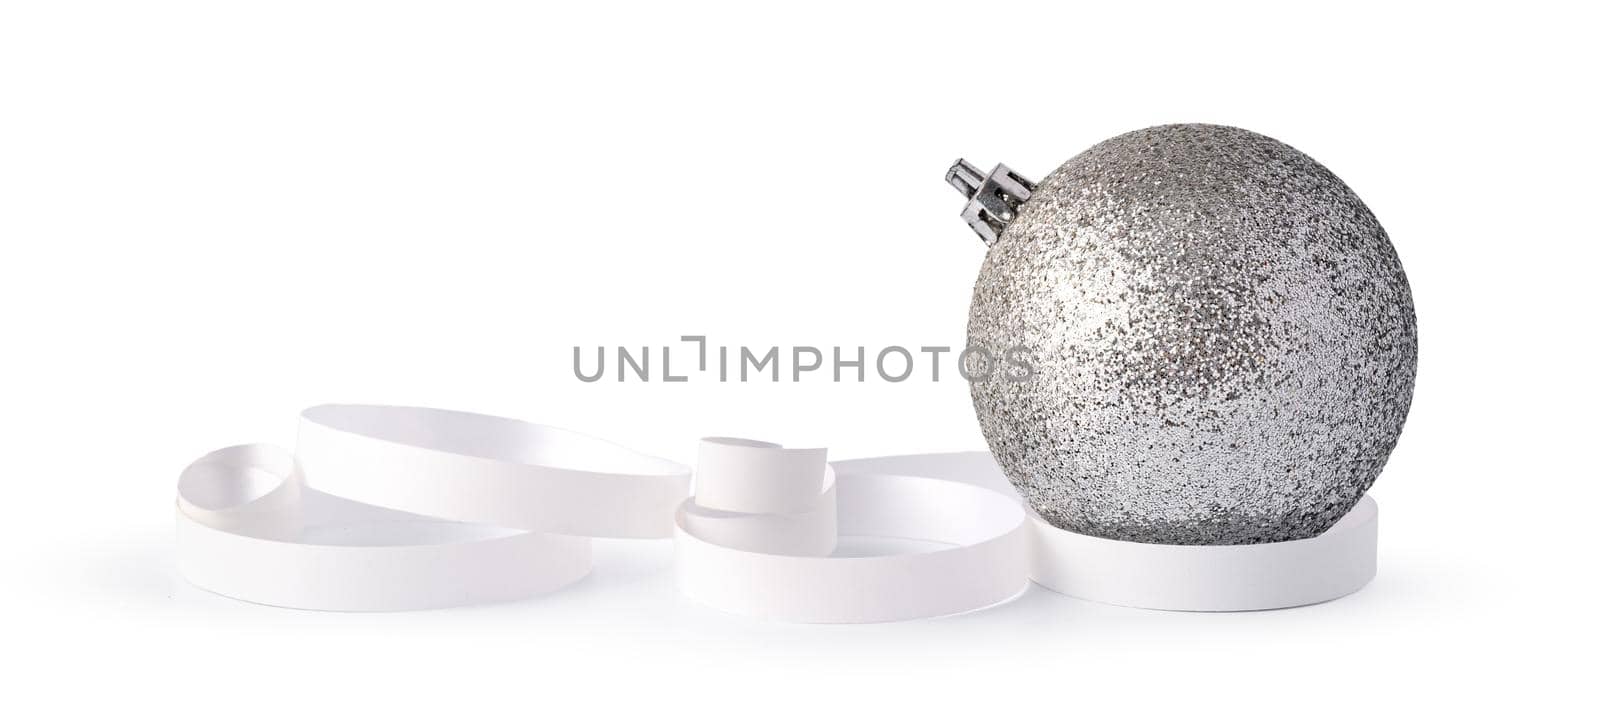 Silver sparkling Christmas baubles isolated on white background by Fabrikasimf